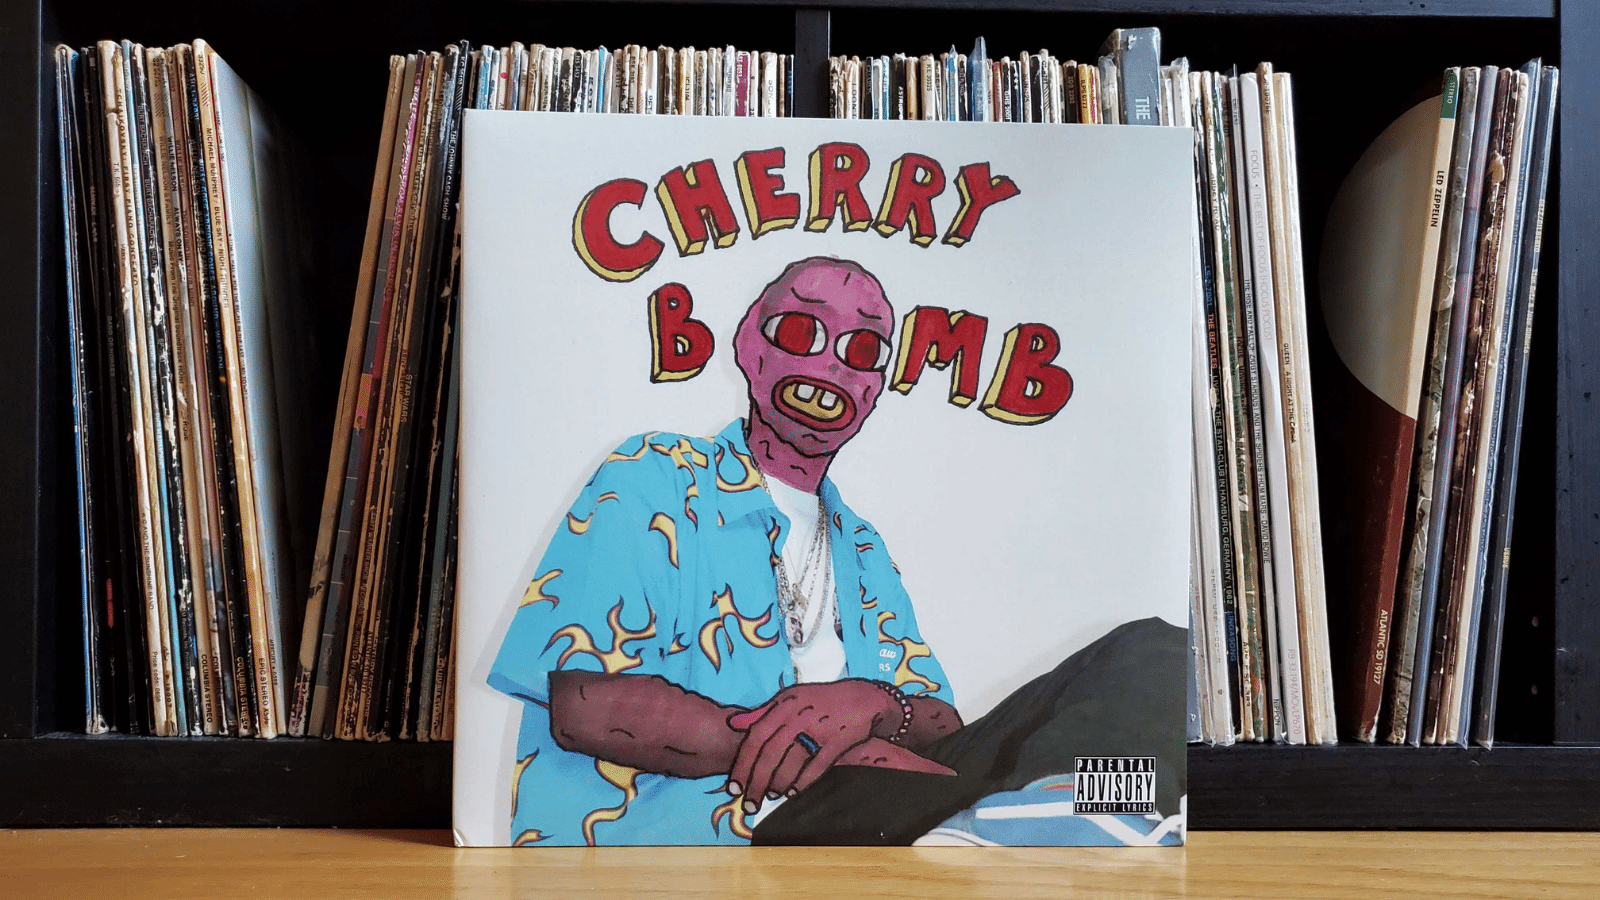 Tyler, the Creator vinyl cover leaning against a shelf filled with other vinyl records